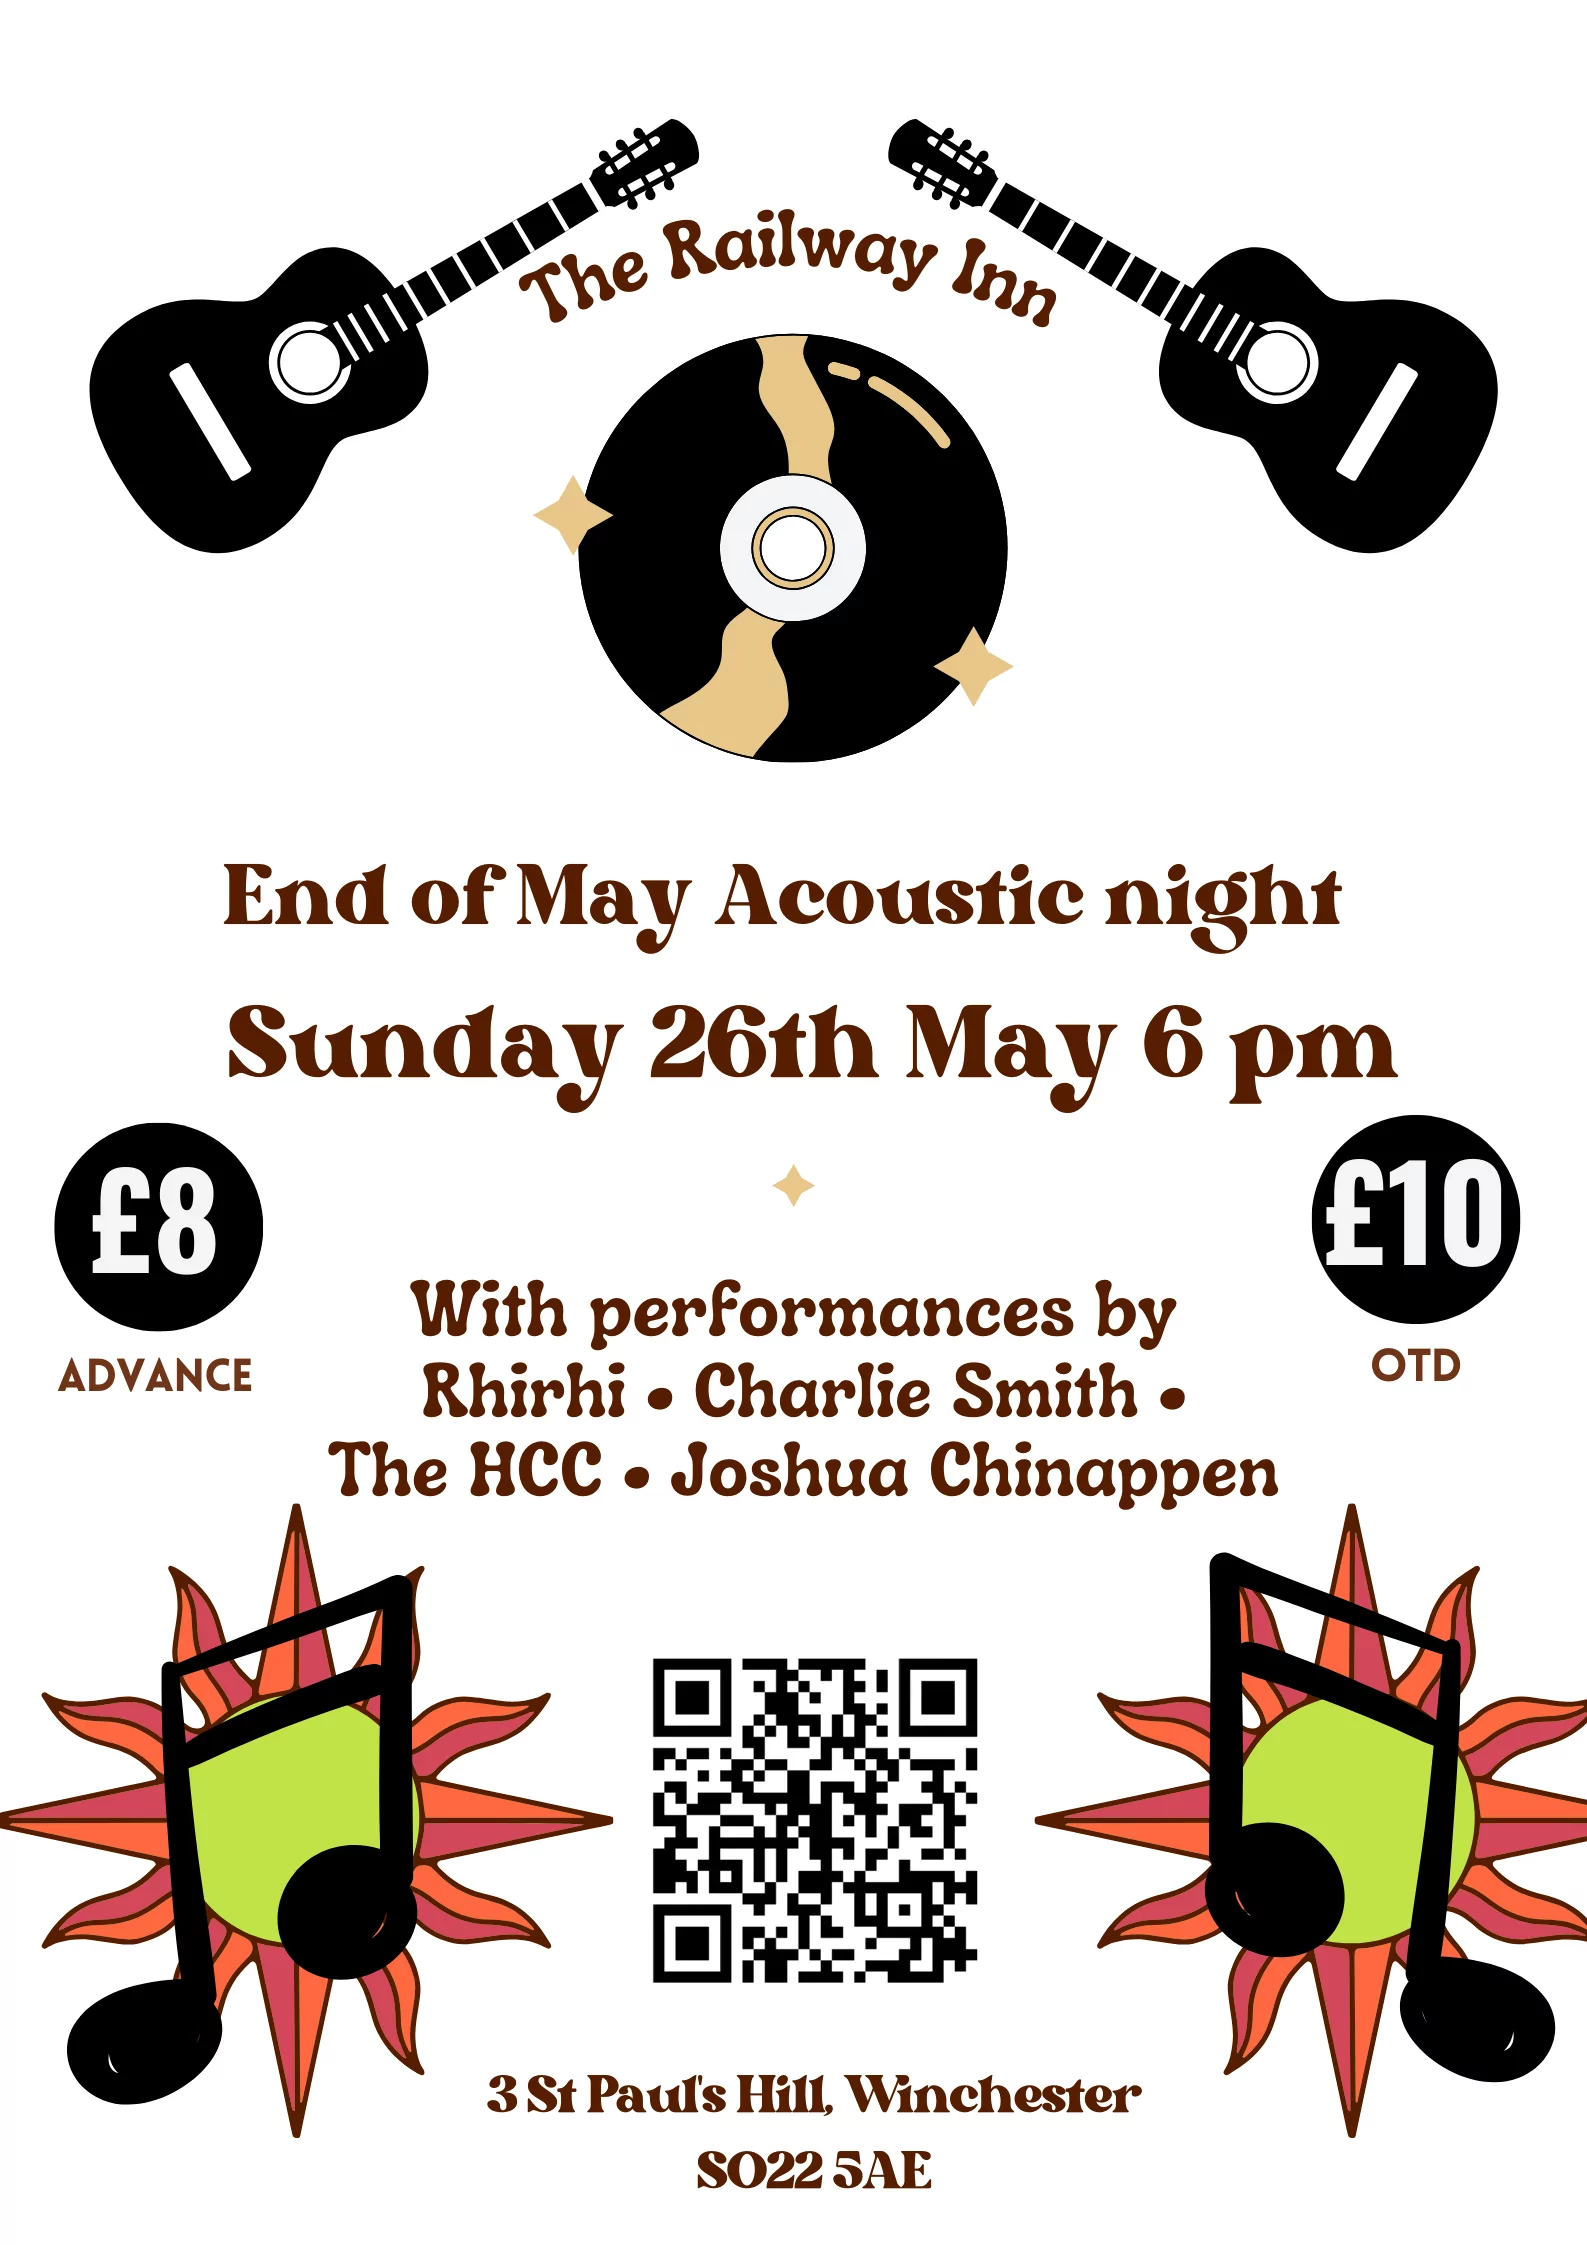 End of May Acoustic Night – The Rail Way Inn